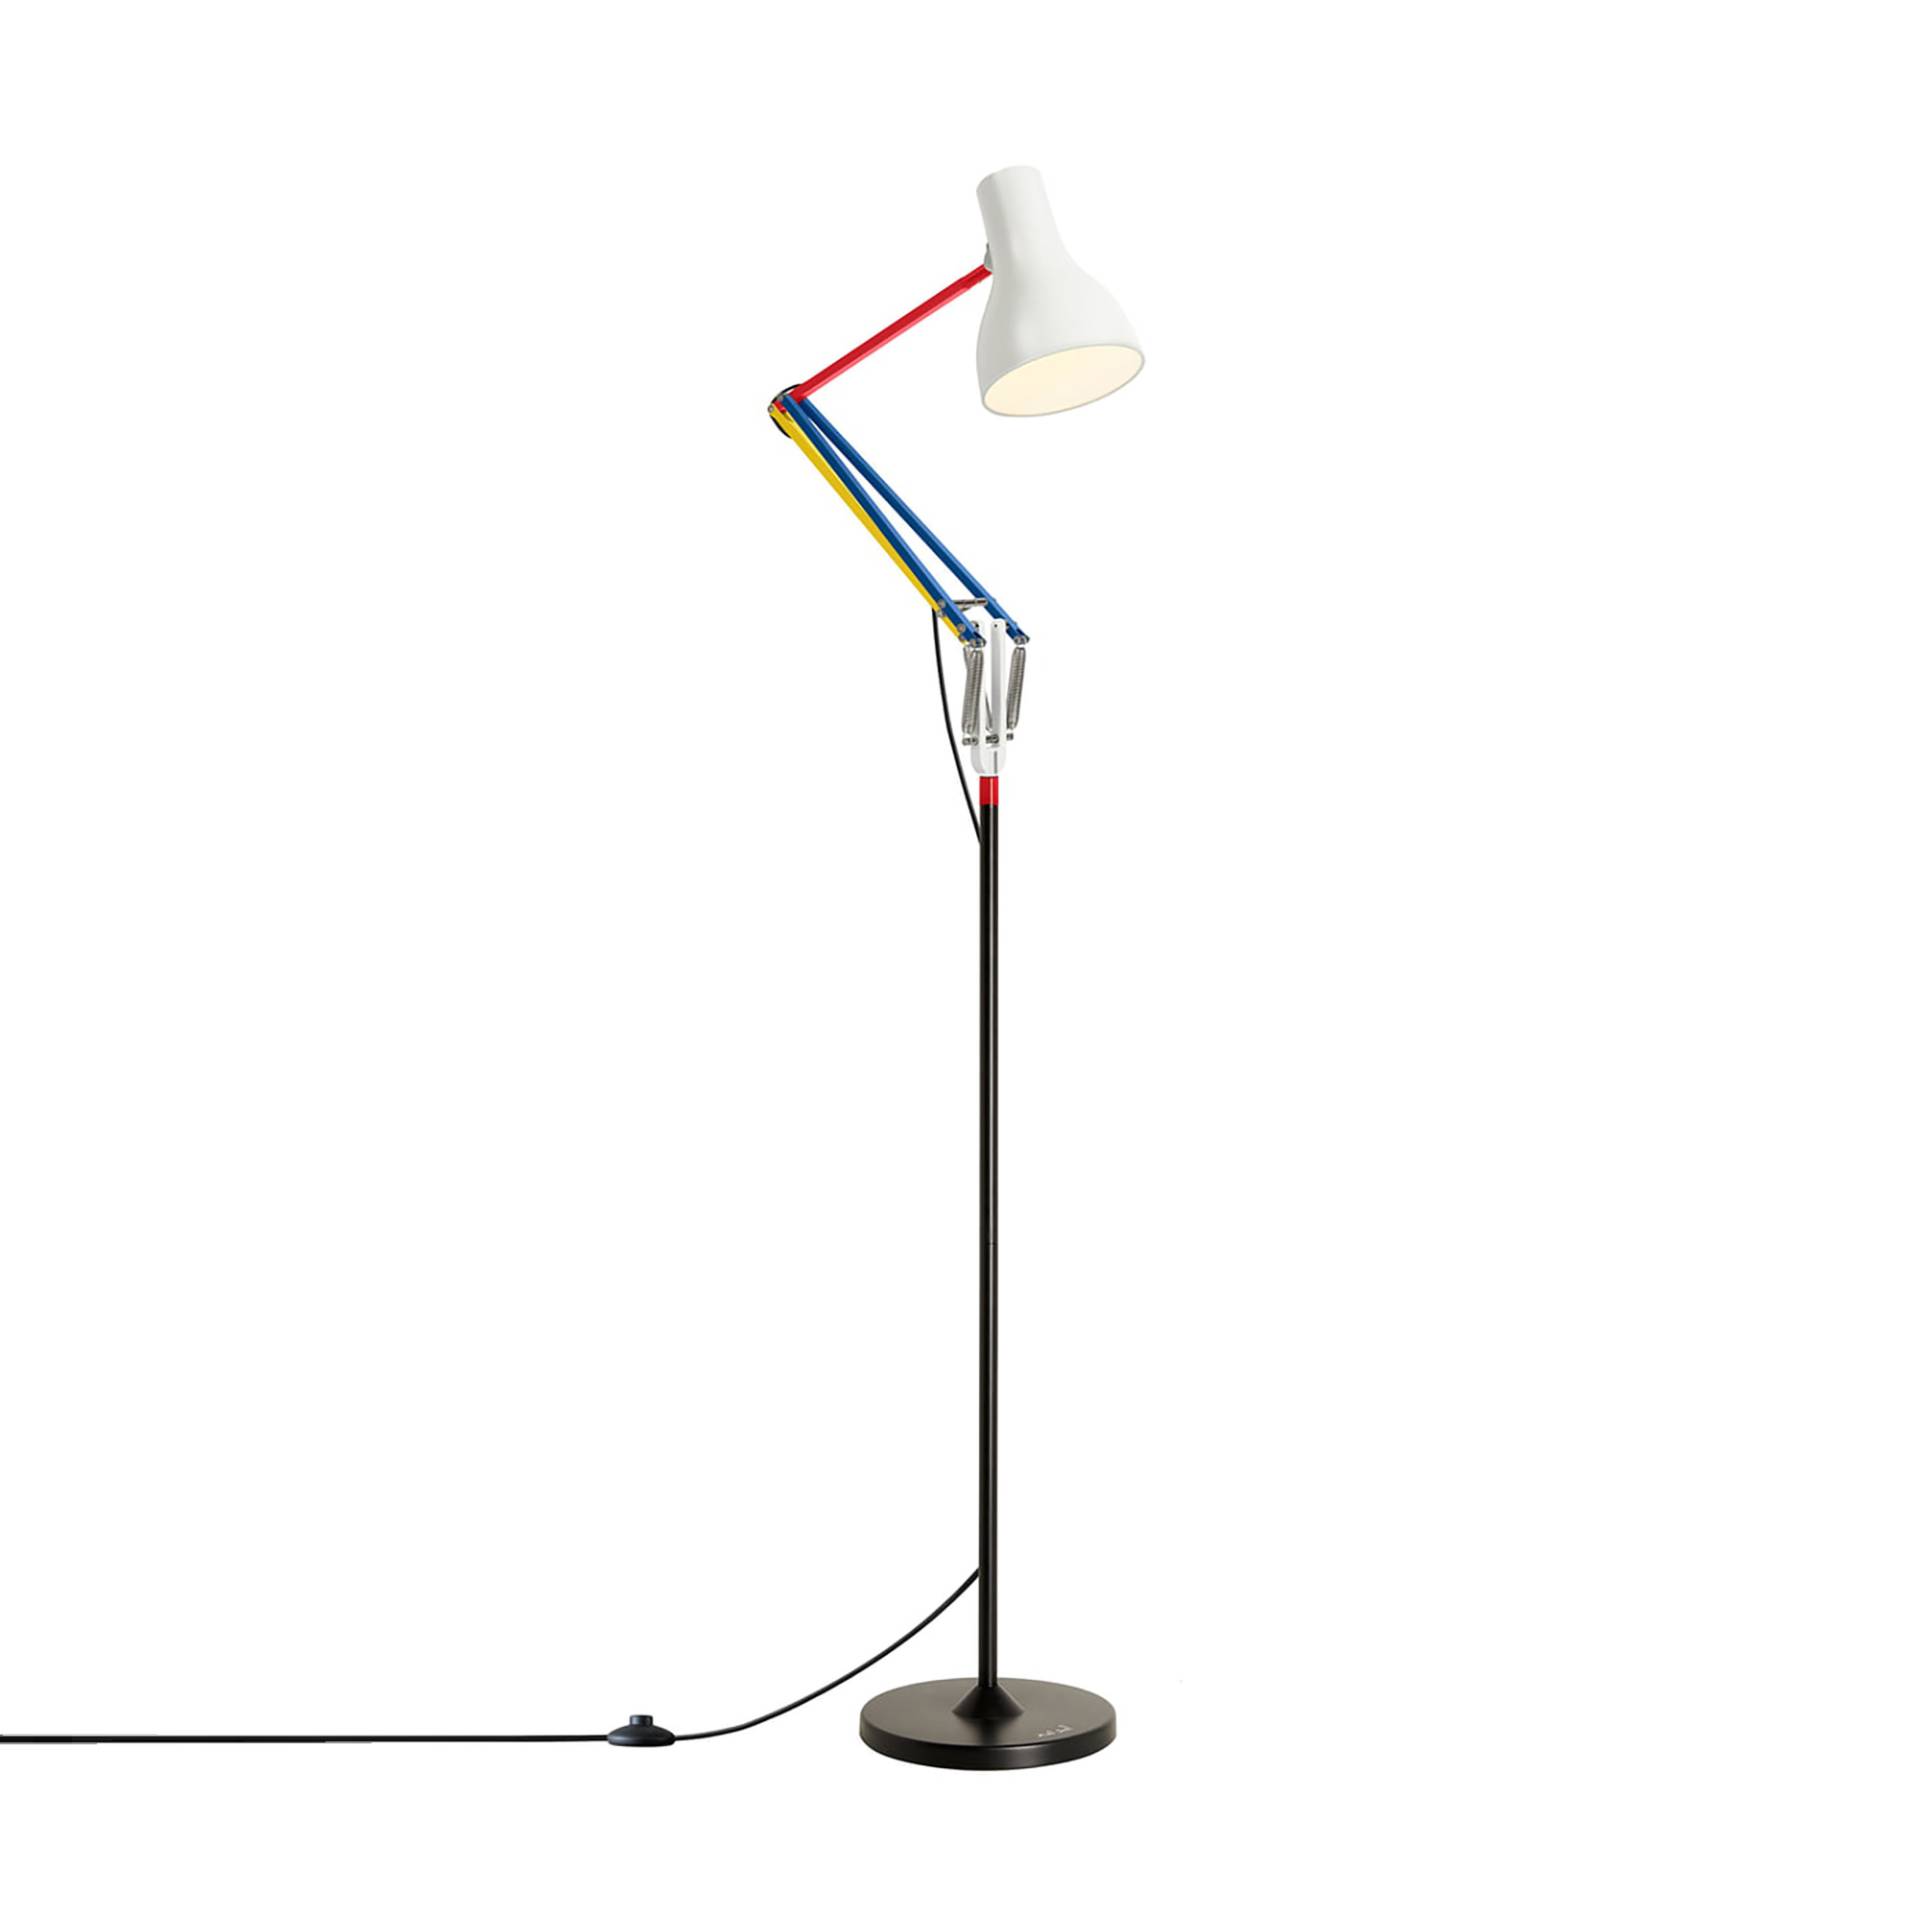 Anglepoise - Paul Smith Type 75 Stehleuchte - Edition 3 - mehrfarbig/matt/H 175cm/inkl. LED E27 6W 600lm 2700K von Anglepoise